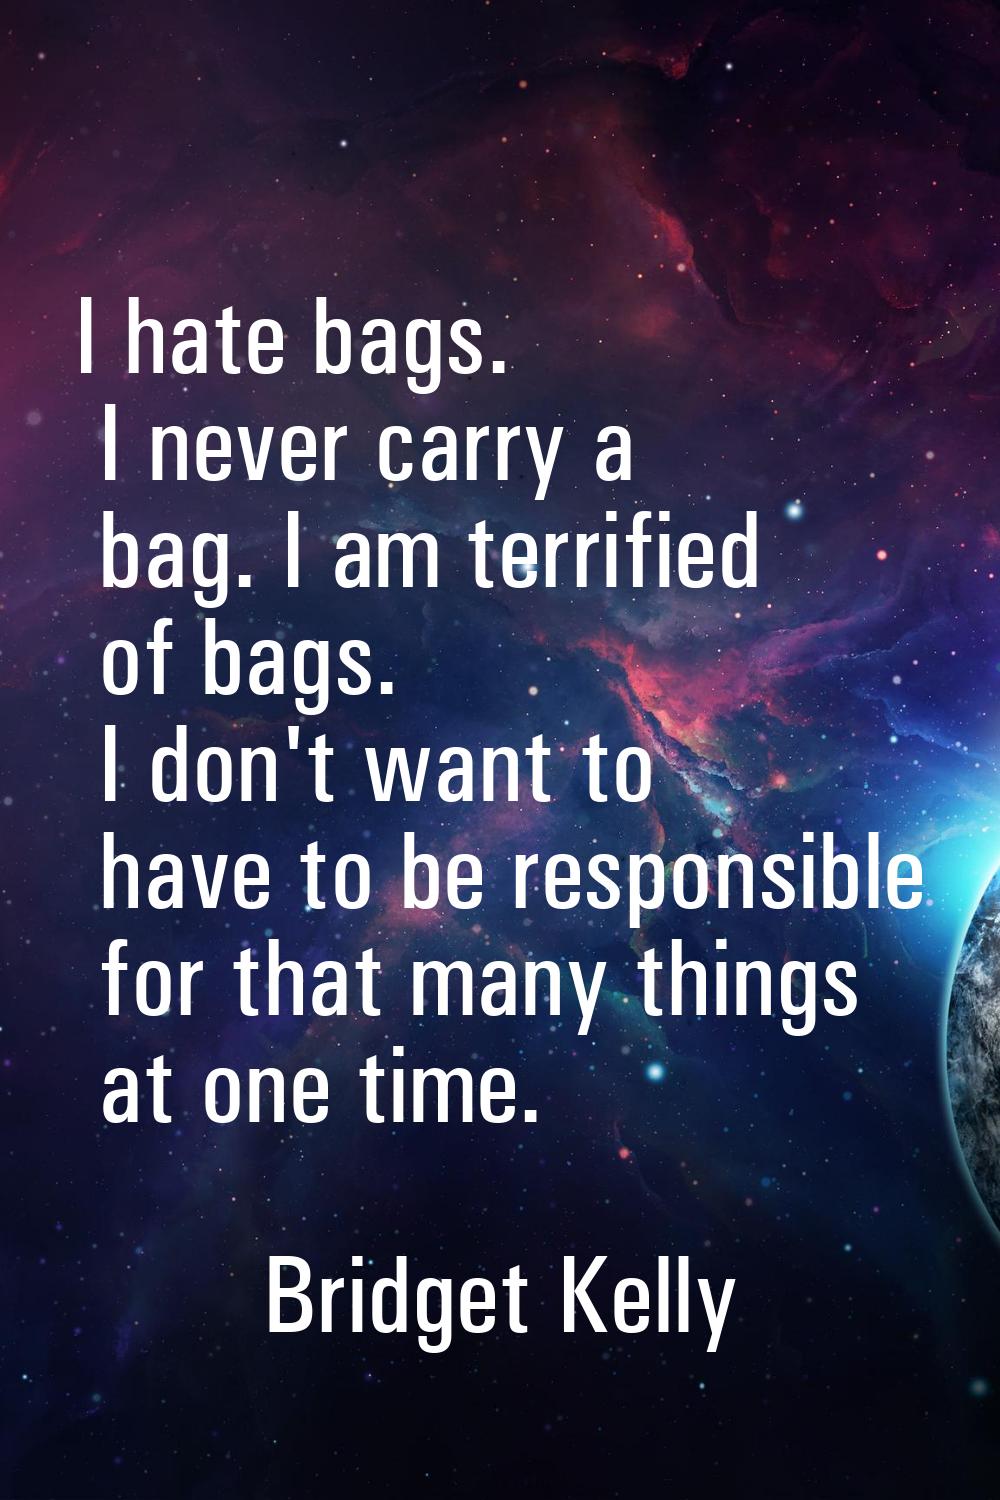 I hate bags. I never carry a bag. I am terrified of bags. I don't want to have to be responsible fo